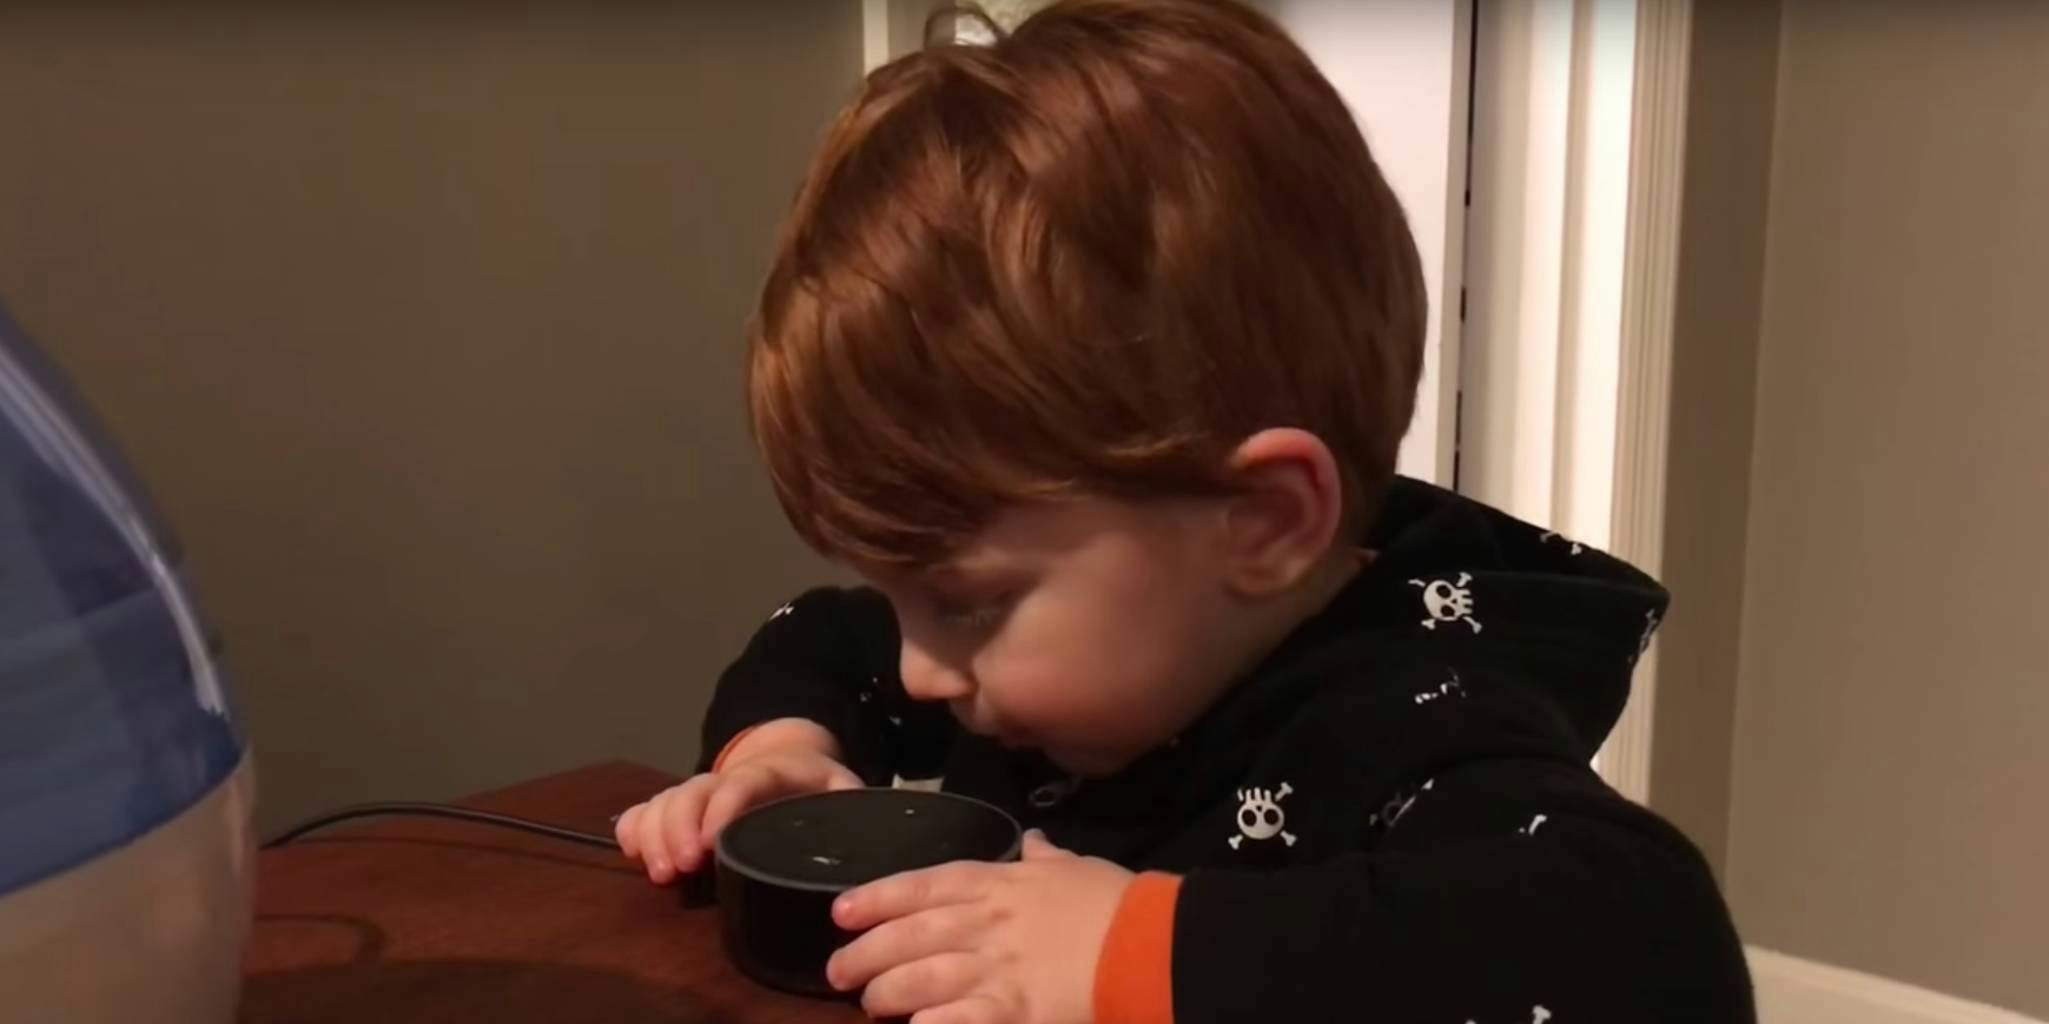 Alexa’s response to this little kid’s sweet request gets NSFW real fast